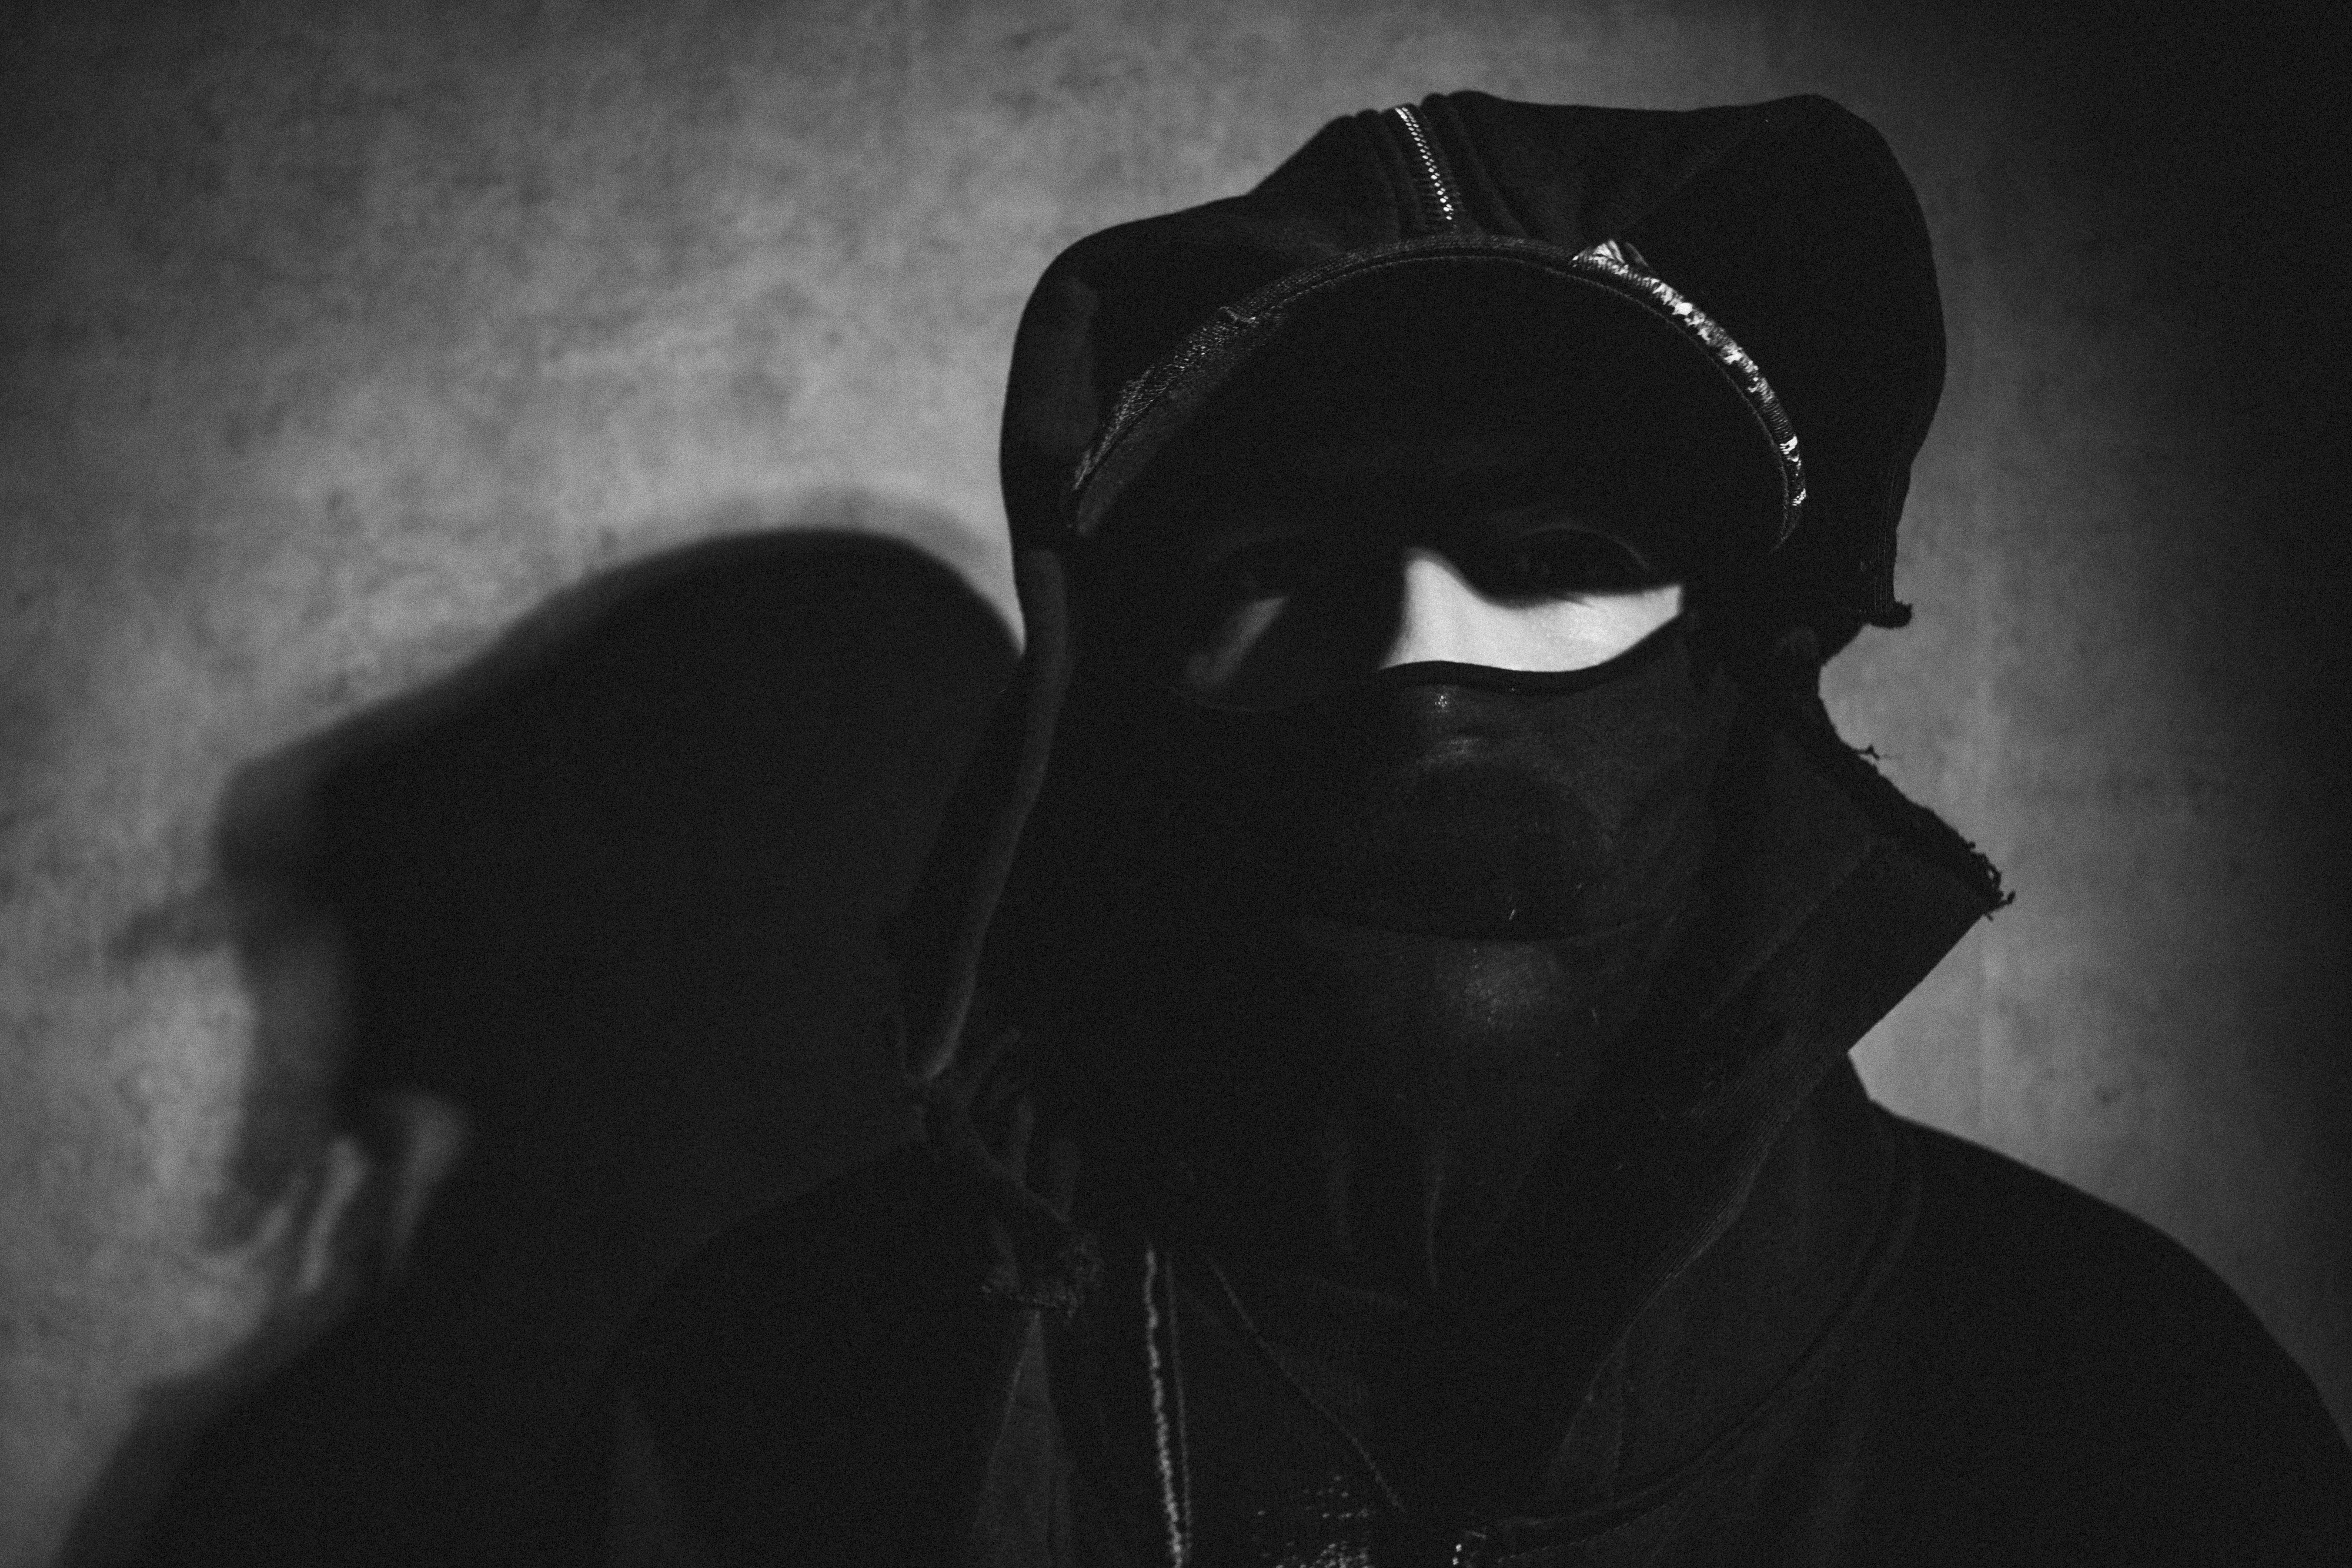 Person wearing a dark, hooded outfit with a mask partially covering their face, creating a mysterious appearance. Background shadow is prominent